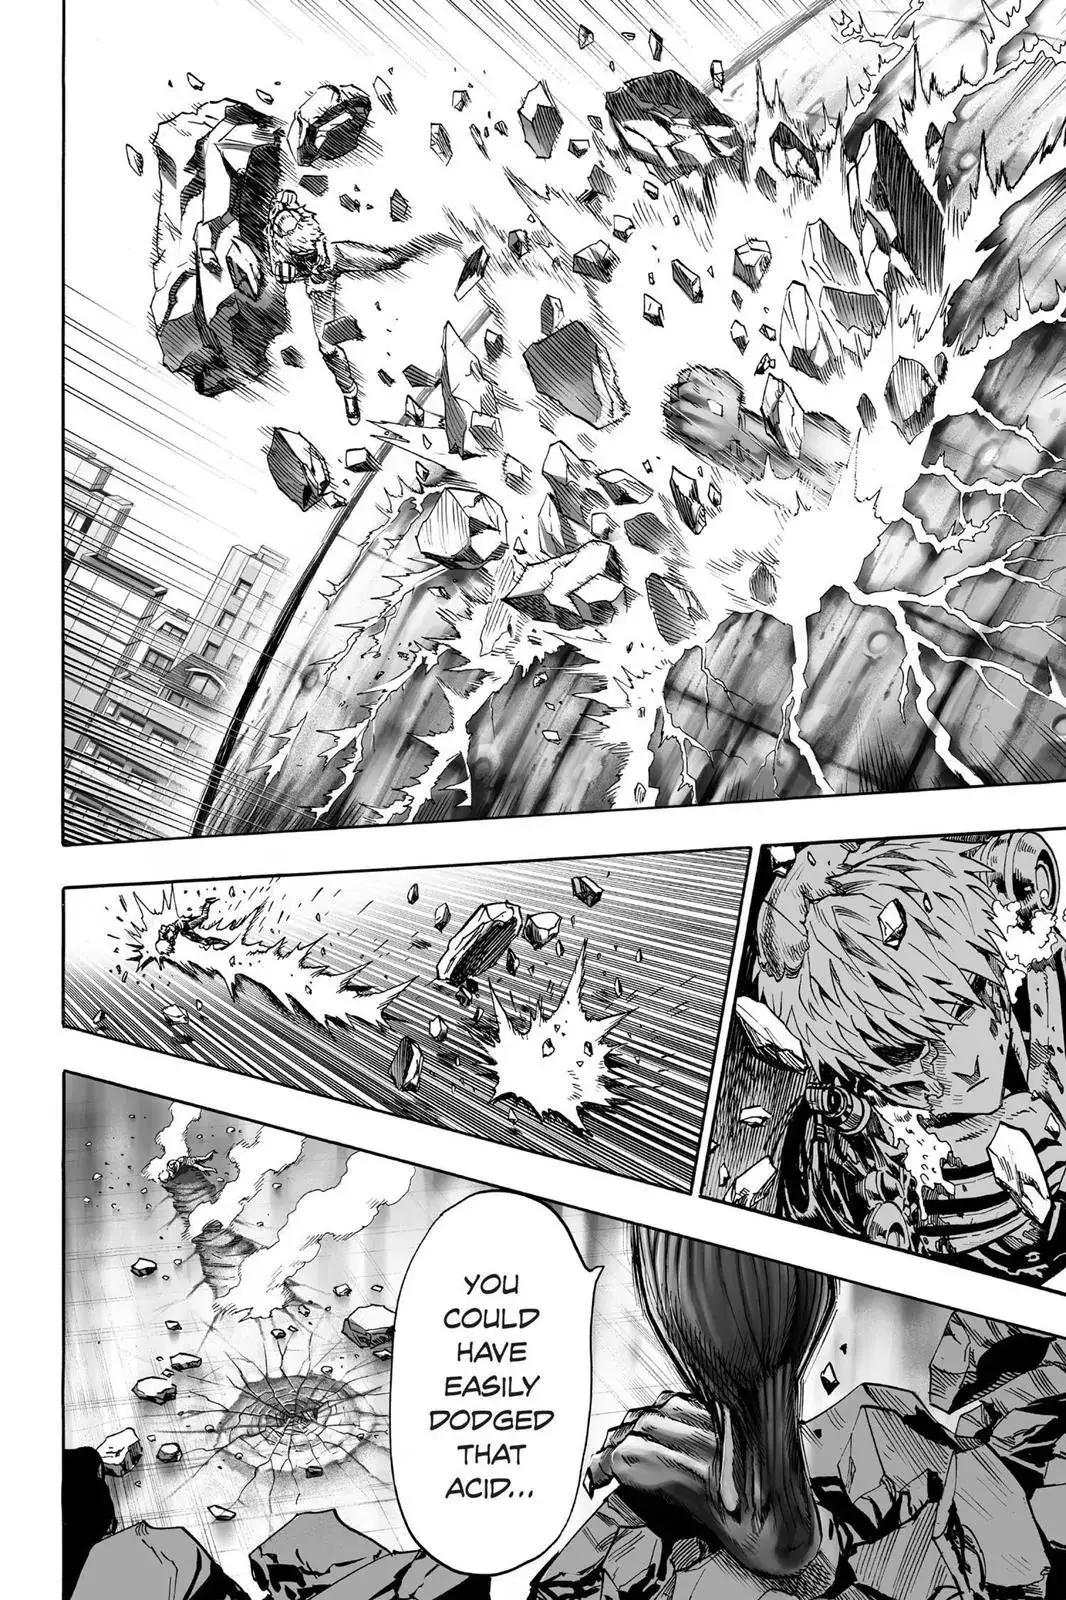 One Punch Man Chapter 27, READ One Punch Man Chapter 27 ONLINE, lost in the cloud genre,lost in the cloud gif,lost in the cloud girl,lost in the cloud goods,lost in the cloud goodreads,lost in the cloud,lost ark cloud gaming,lost odyssey cloud gaming,lost in the cloud fanart,lost in the cloud fanfic,lost in the cloud fandom,lost in the cloud first kiss,lost in the cloud font,lost in the cloud ending,lost in the cloud episode 97,lost in the cloud edit,lost in the cloud explained,lost in the cloud dog,lost in the cloud discord server,lost in the cloud desktop wallpaper,lost in the cloud drawing,can't find my cloud on network,lost in the cloud characters,lost in the cloud chapter 93 release date,lost in the cloud birthday,lost in the cloud birthday art,lost in the cloud background,lost in the cloud banner,lost in the clouds meaning,what is the black cloud in lost,lost in the cloud ao3,lost in the cloud anime,lost in the cloud art,lost in the cloud author twitter,lost in the cloud author instagram,lost in the cloud artist,lost in the cloud acrylic stand,lost in the cloud artist twitter,lost in the cloud art style,lost in the cloud analysis